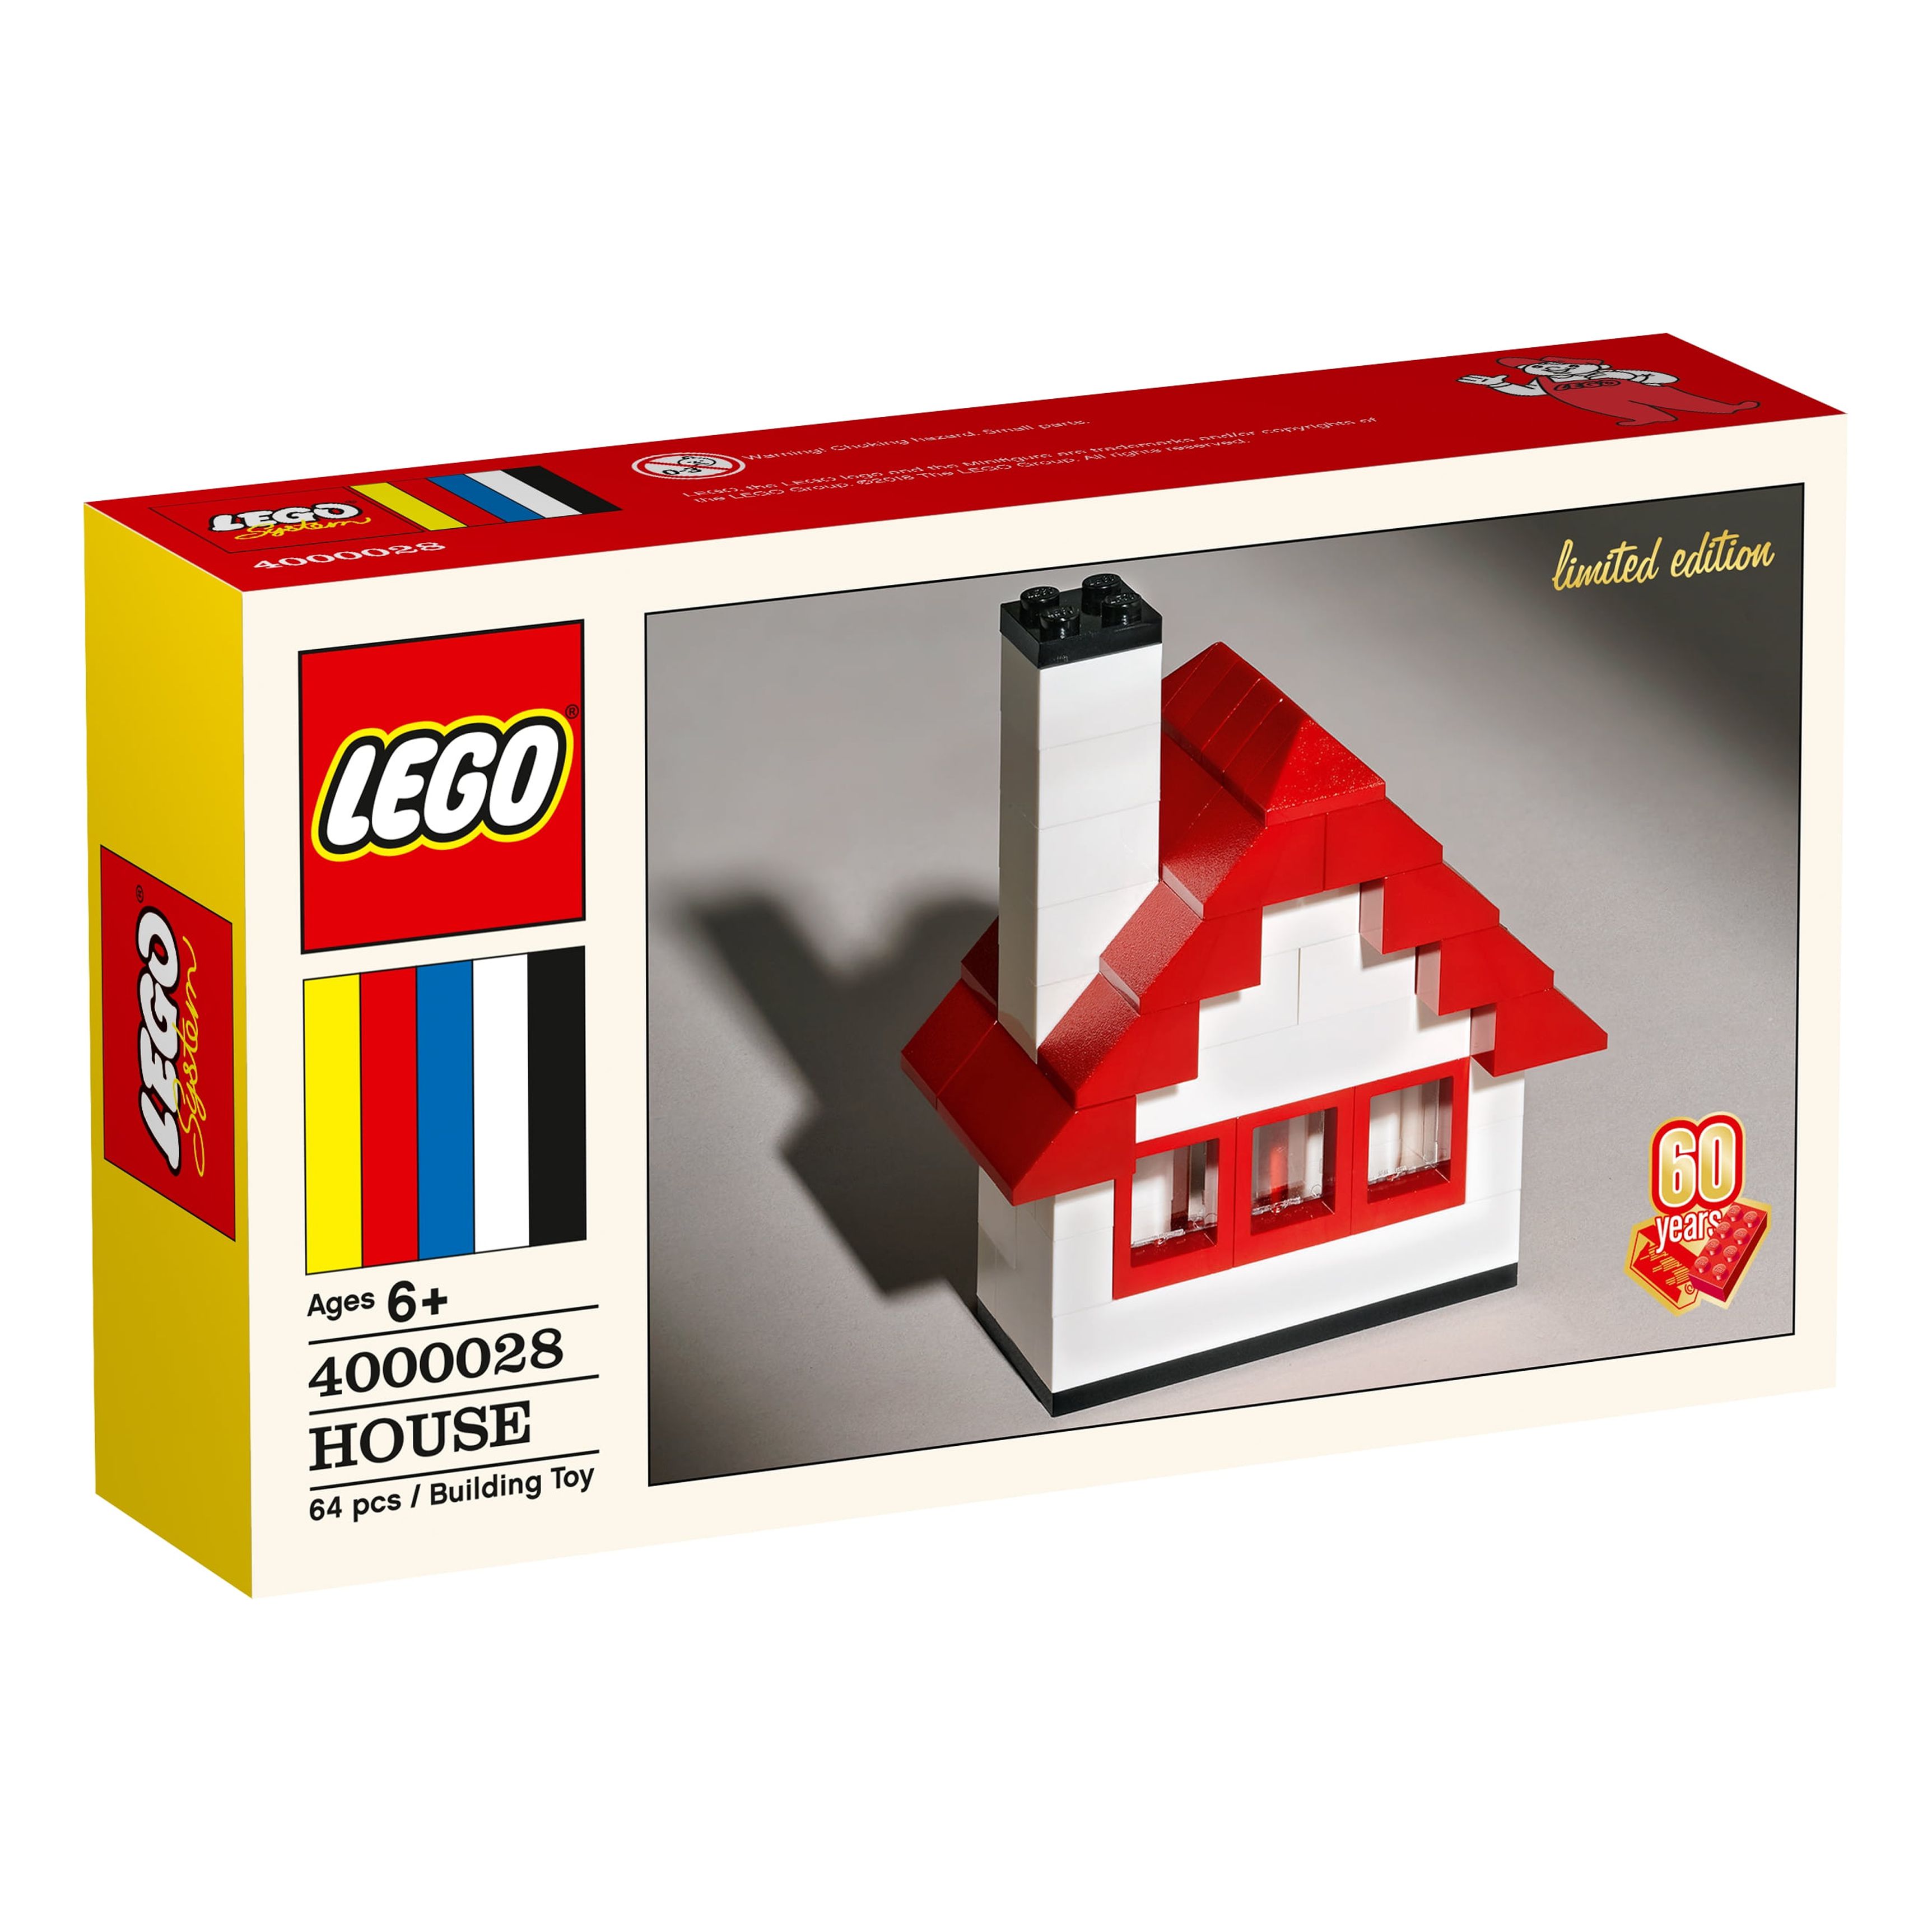 LEGO Classic 60th Anniversary House 4000028 - Online Only - image 1 of 3